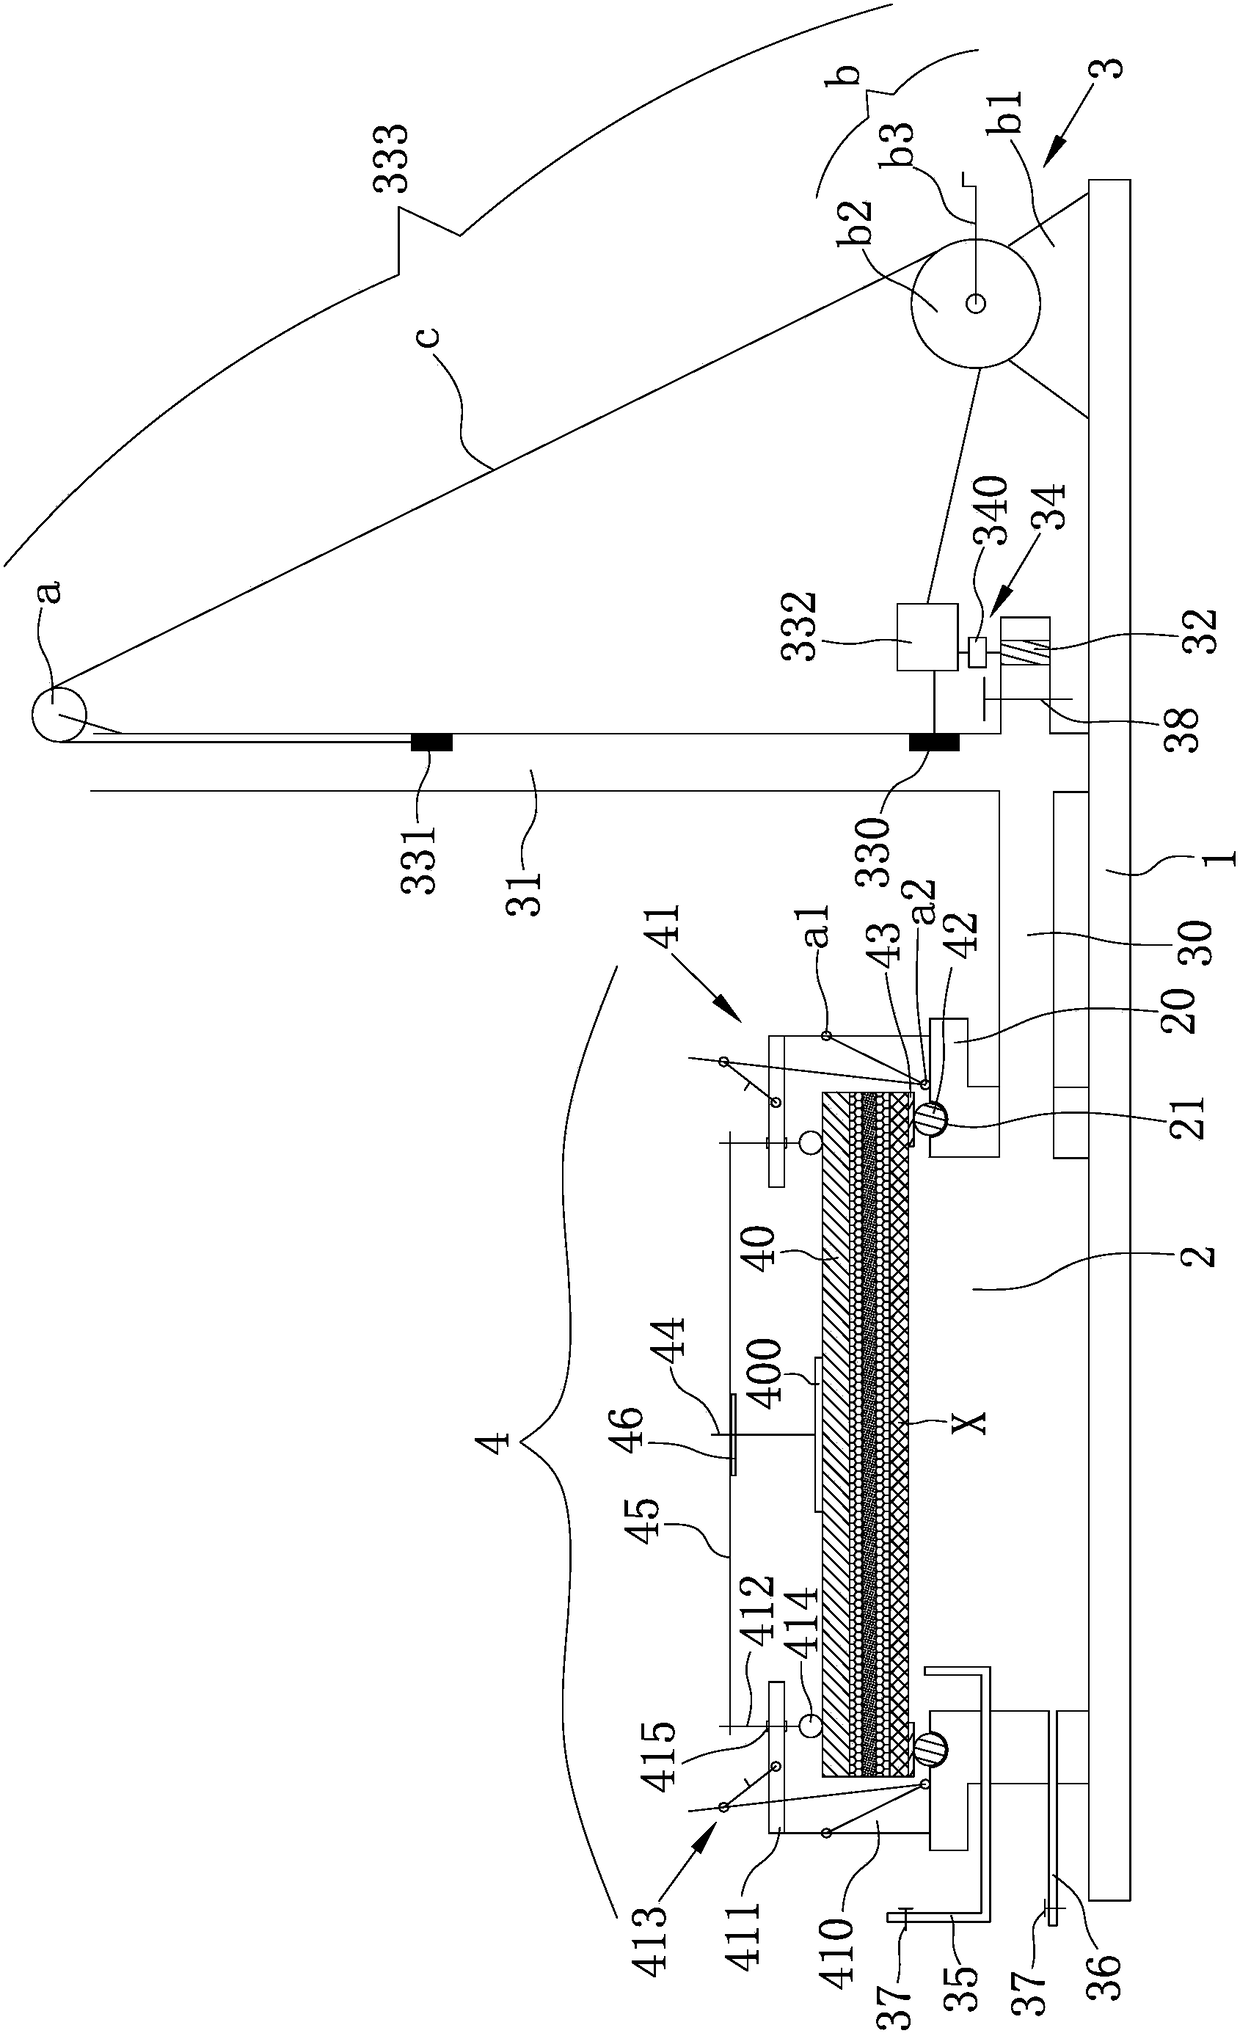 Electric low pressure test device and method for testing watertightness of waterproof roll